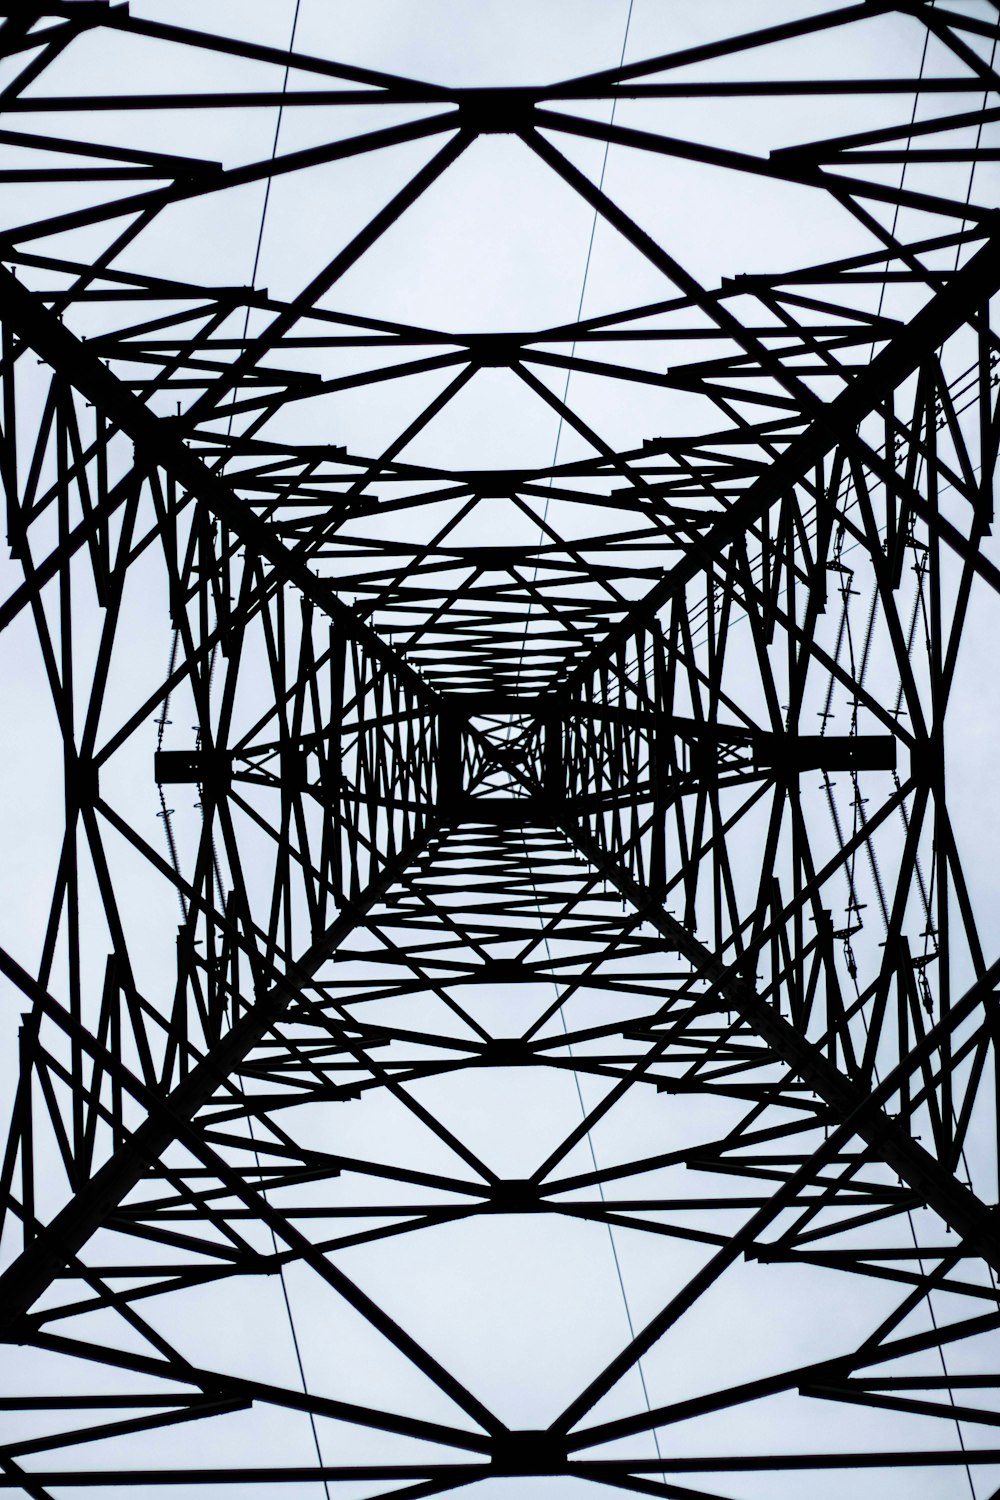 a very tall metal structure with lots of wires